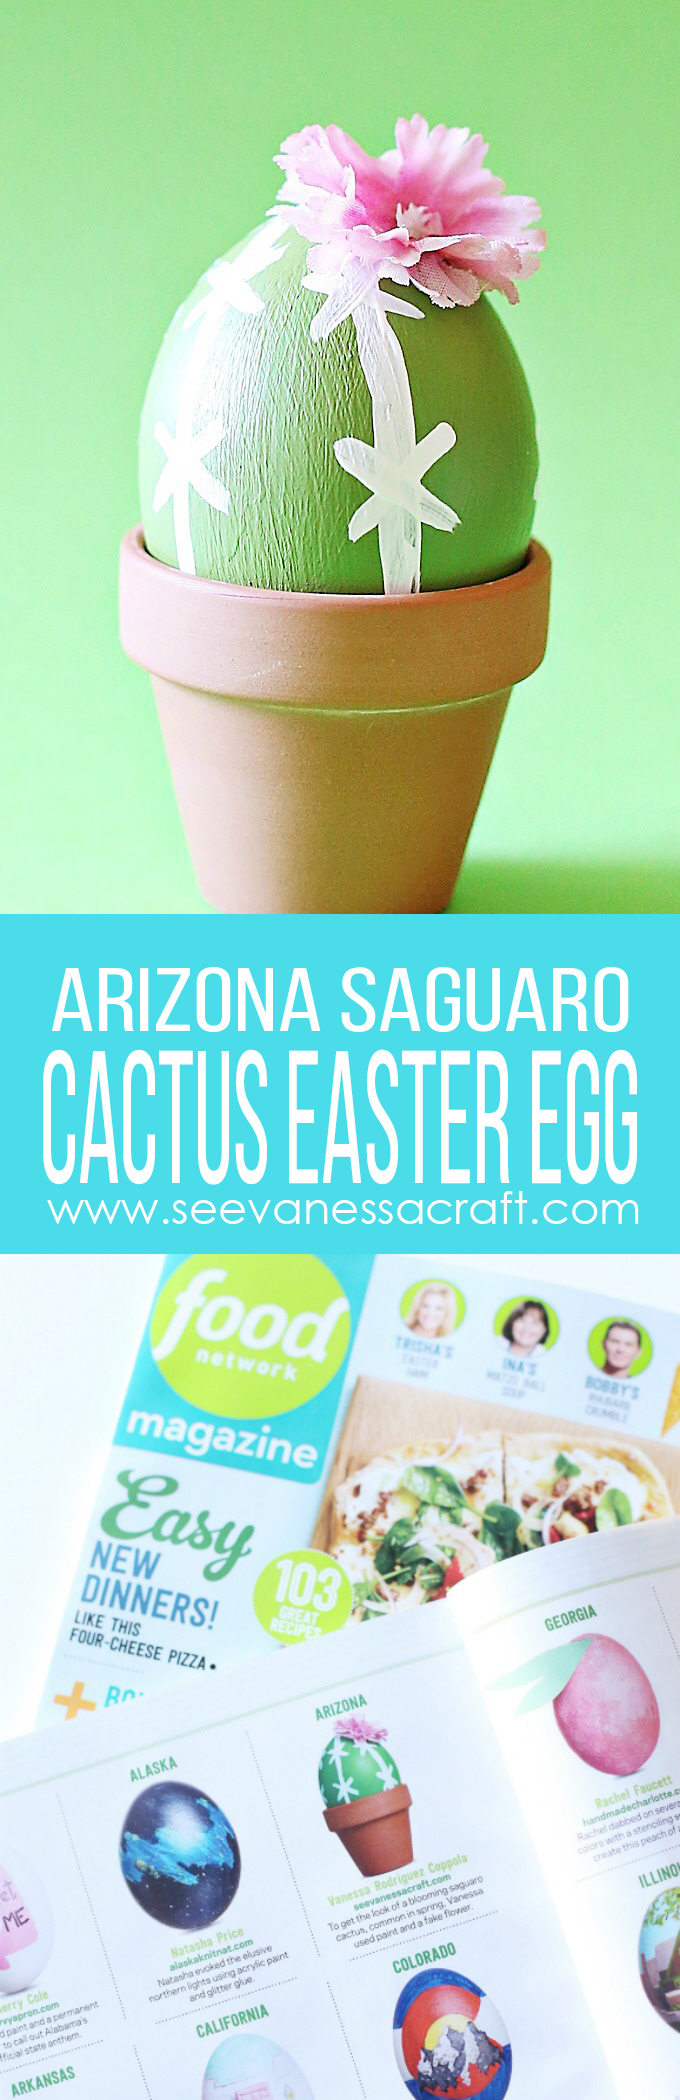 cactus easter egg saguaro painted craft affiliate convenience contains links